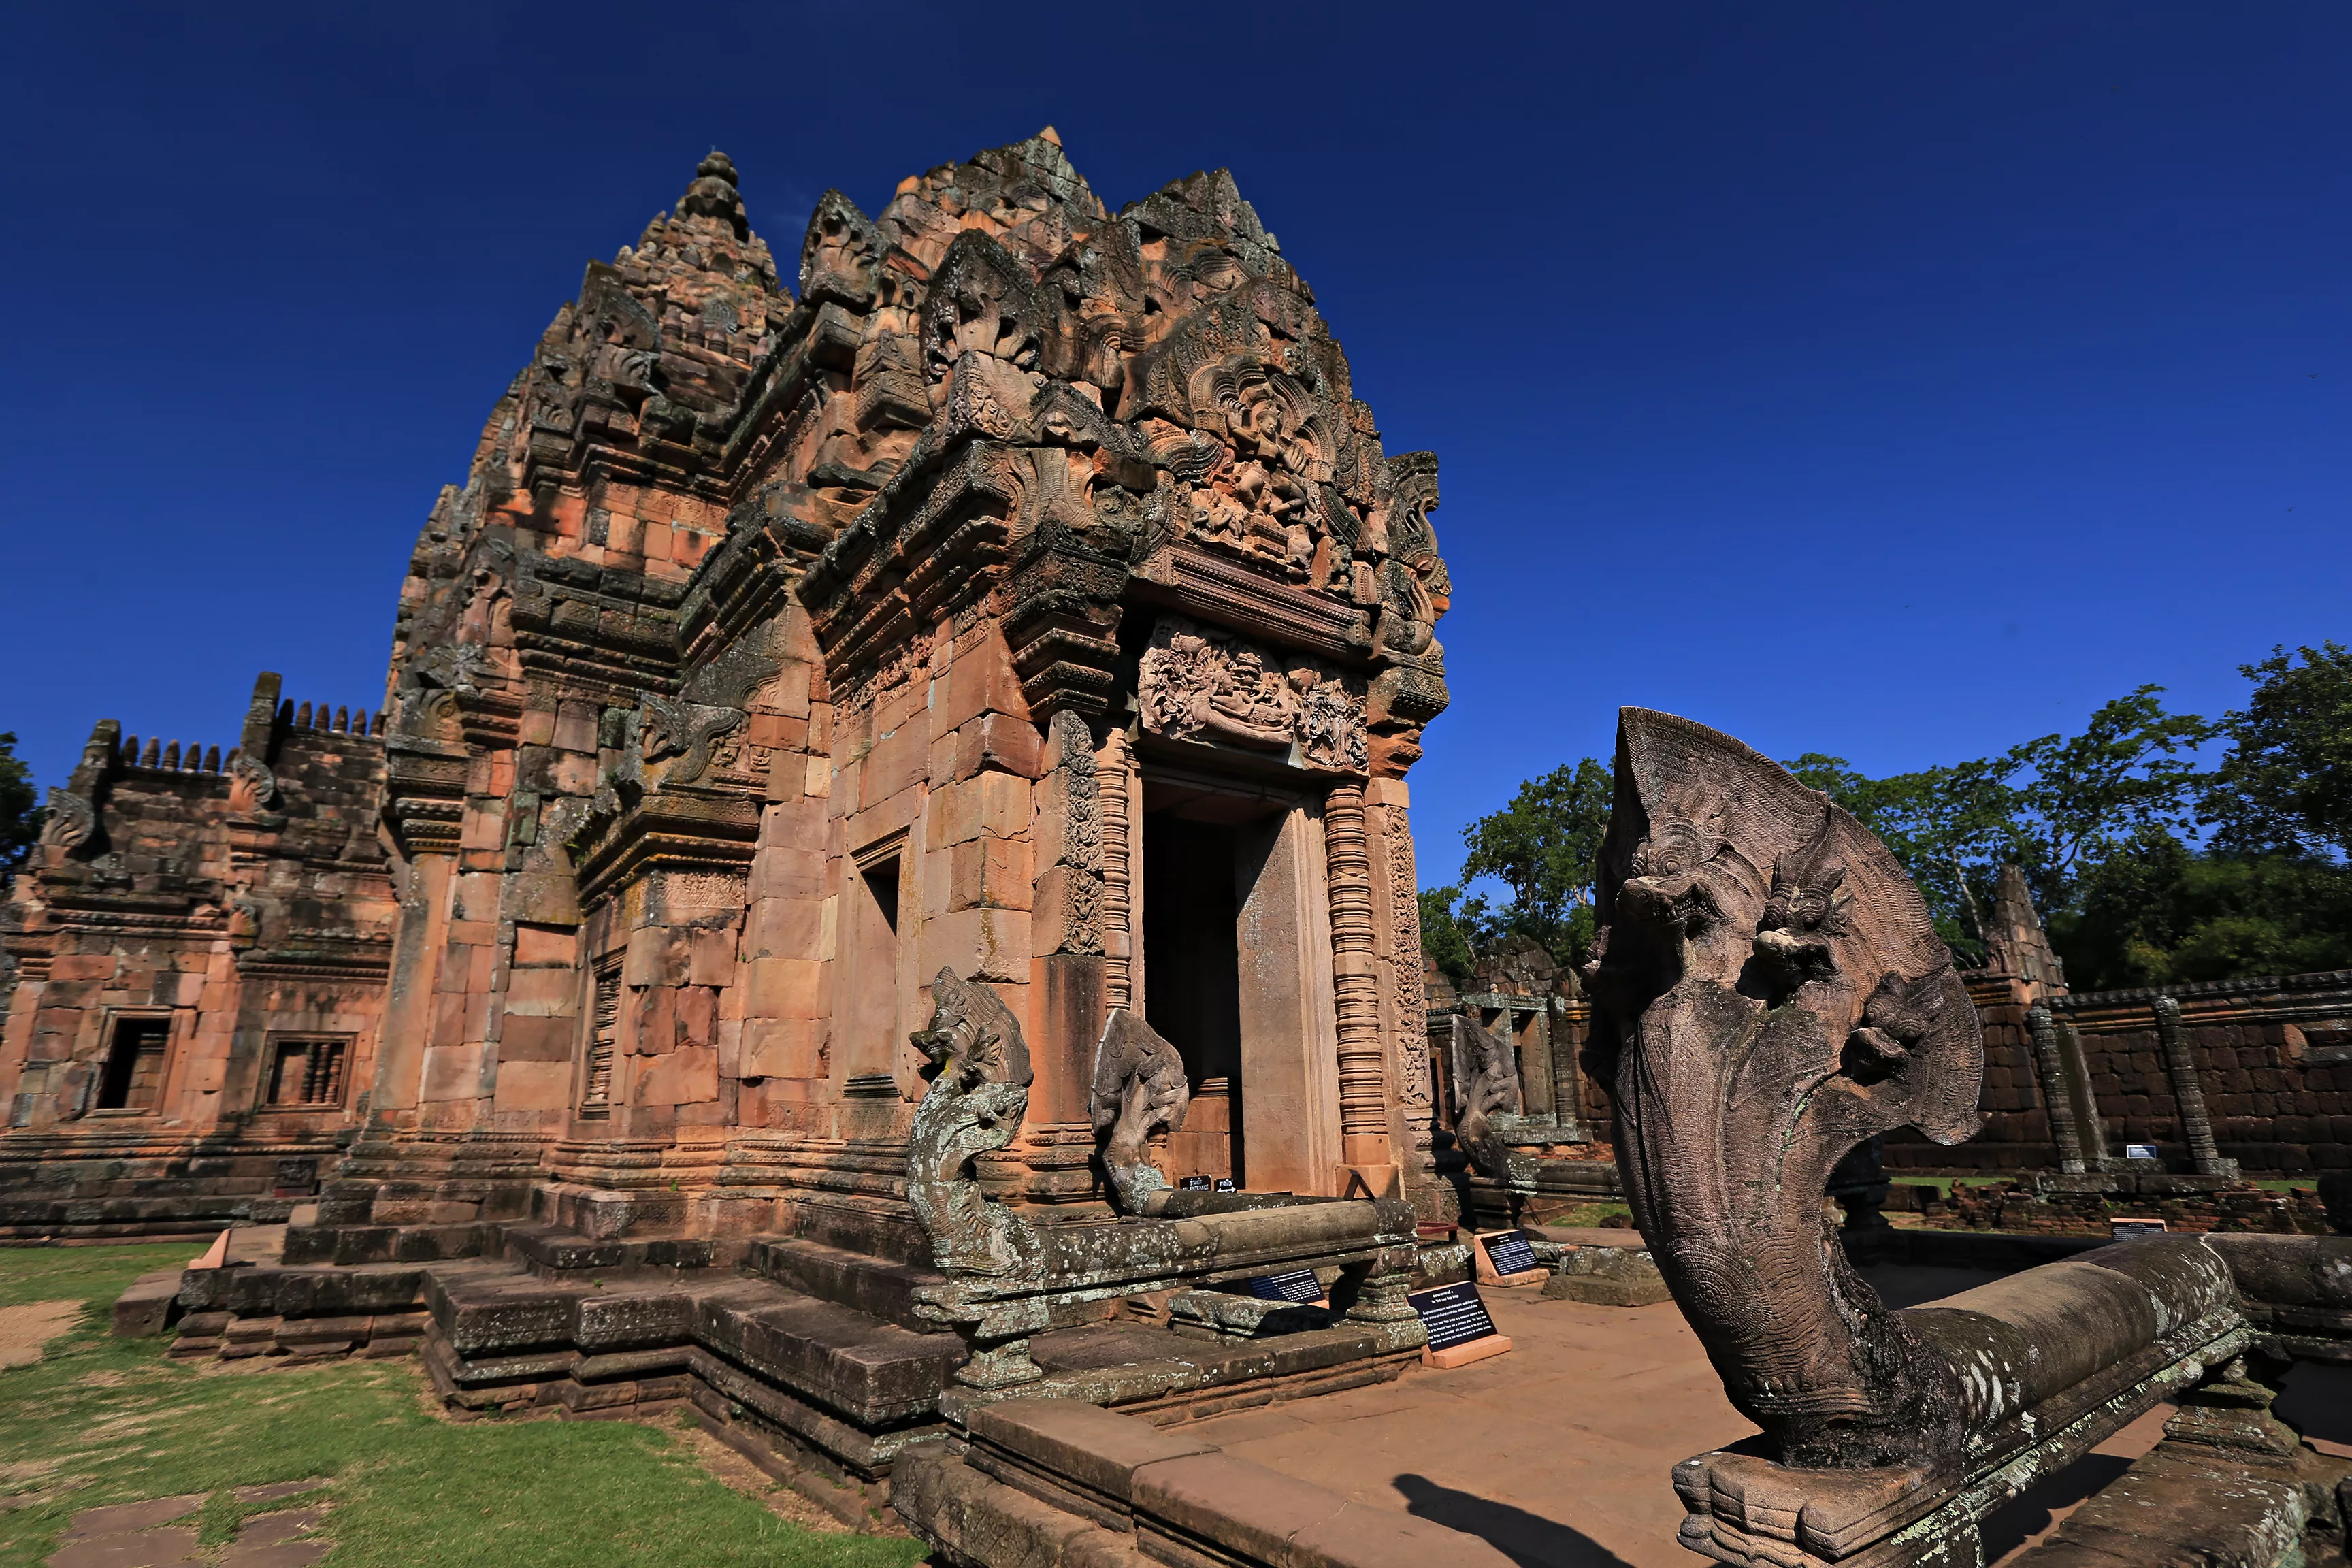 Phanom Rung in Thailand, Central Asia | Architecture,Trekking & Hiking - Rated 4